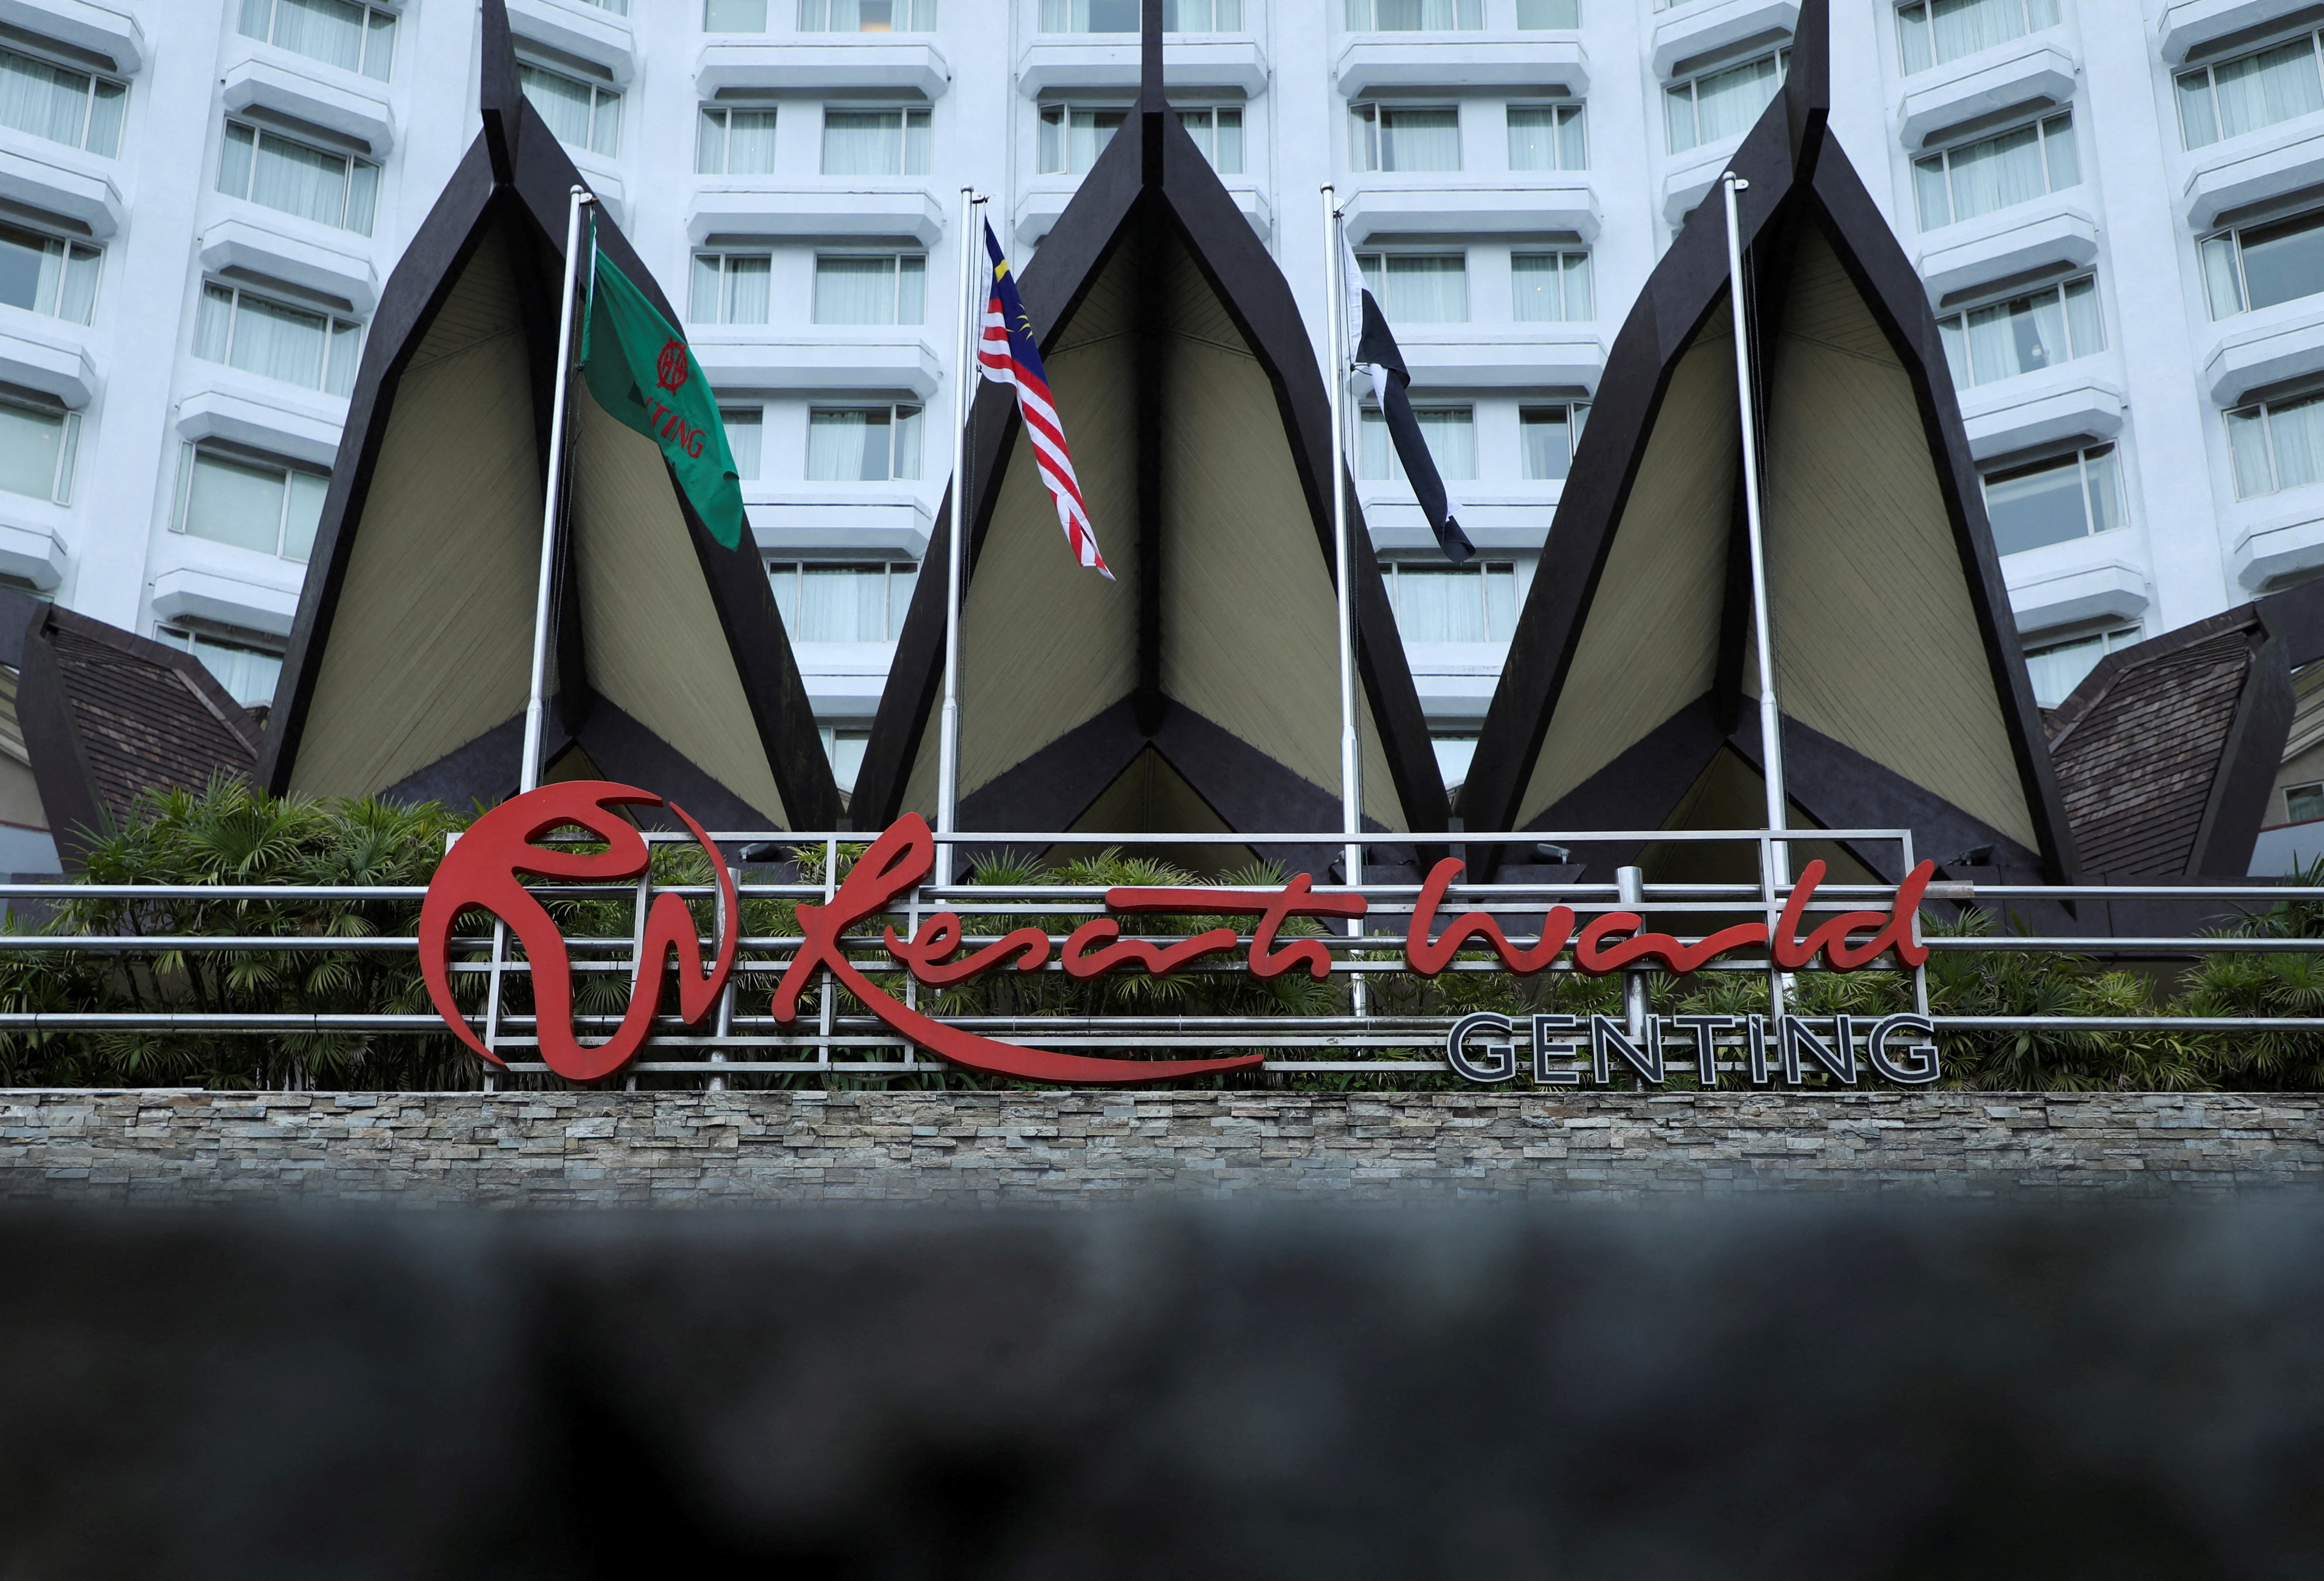 Signage of Genting Malaysia’s Resorts World is displayed at its complex of casino, hotel and entertainment park in Genting Highlands